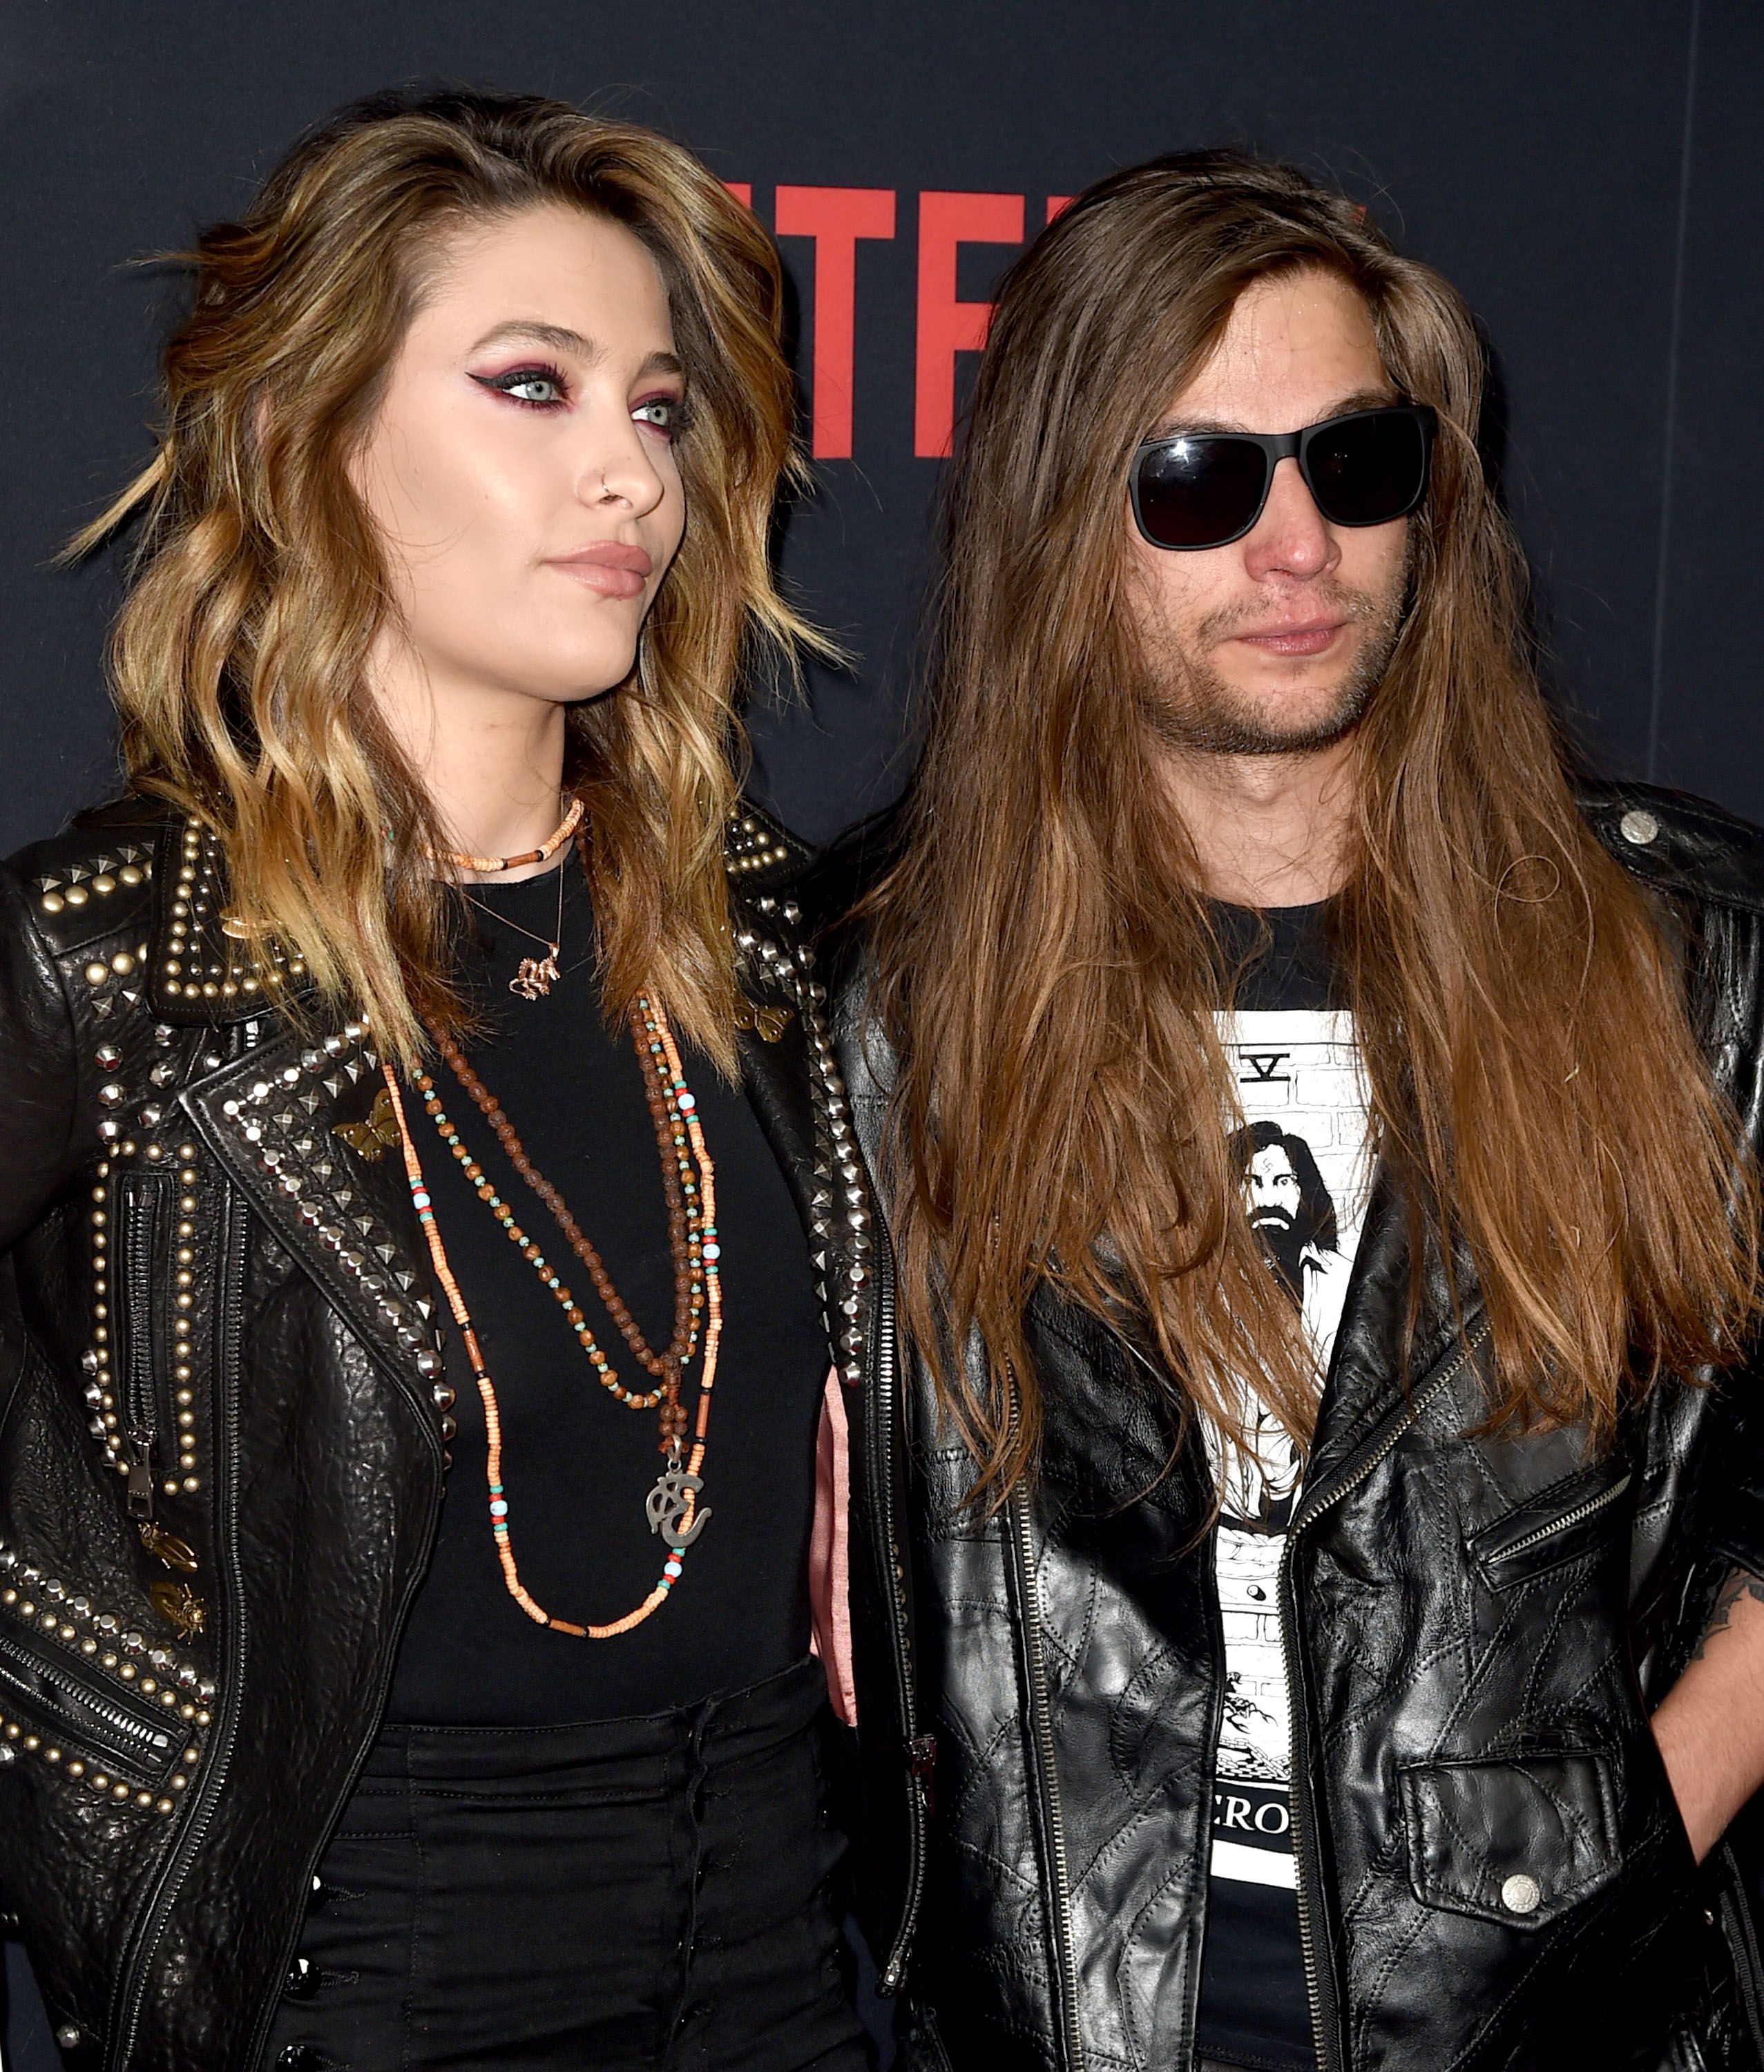 Paris Jackson and Gabriel Glenn at the premiere of Netflix's "The Dirt" at ArcLight Hollywood on March 18, 2019 | Photo: Getty Images